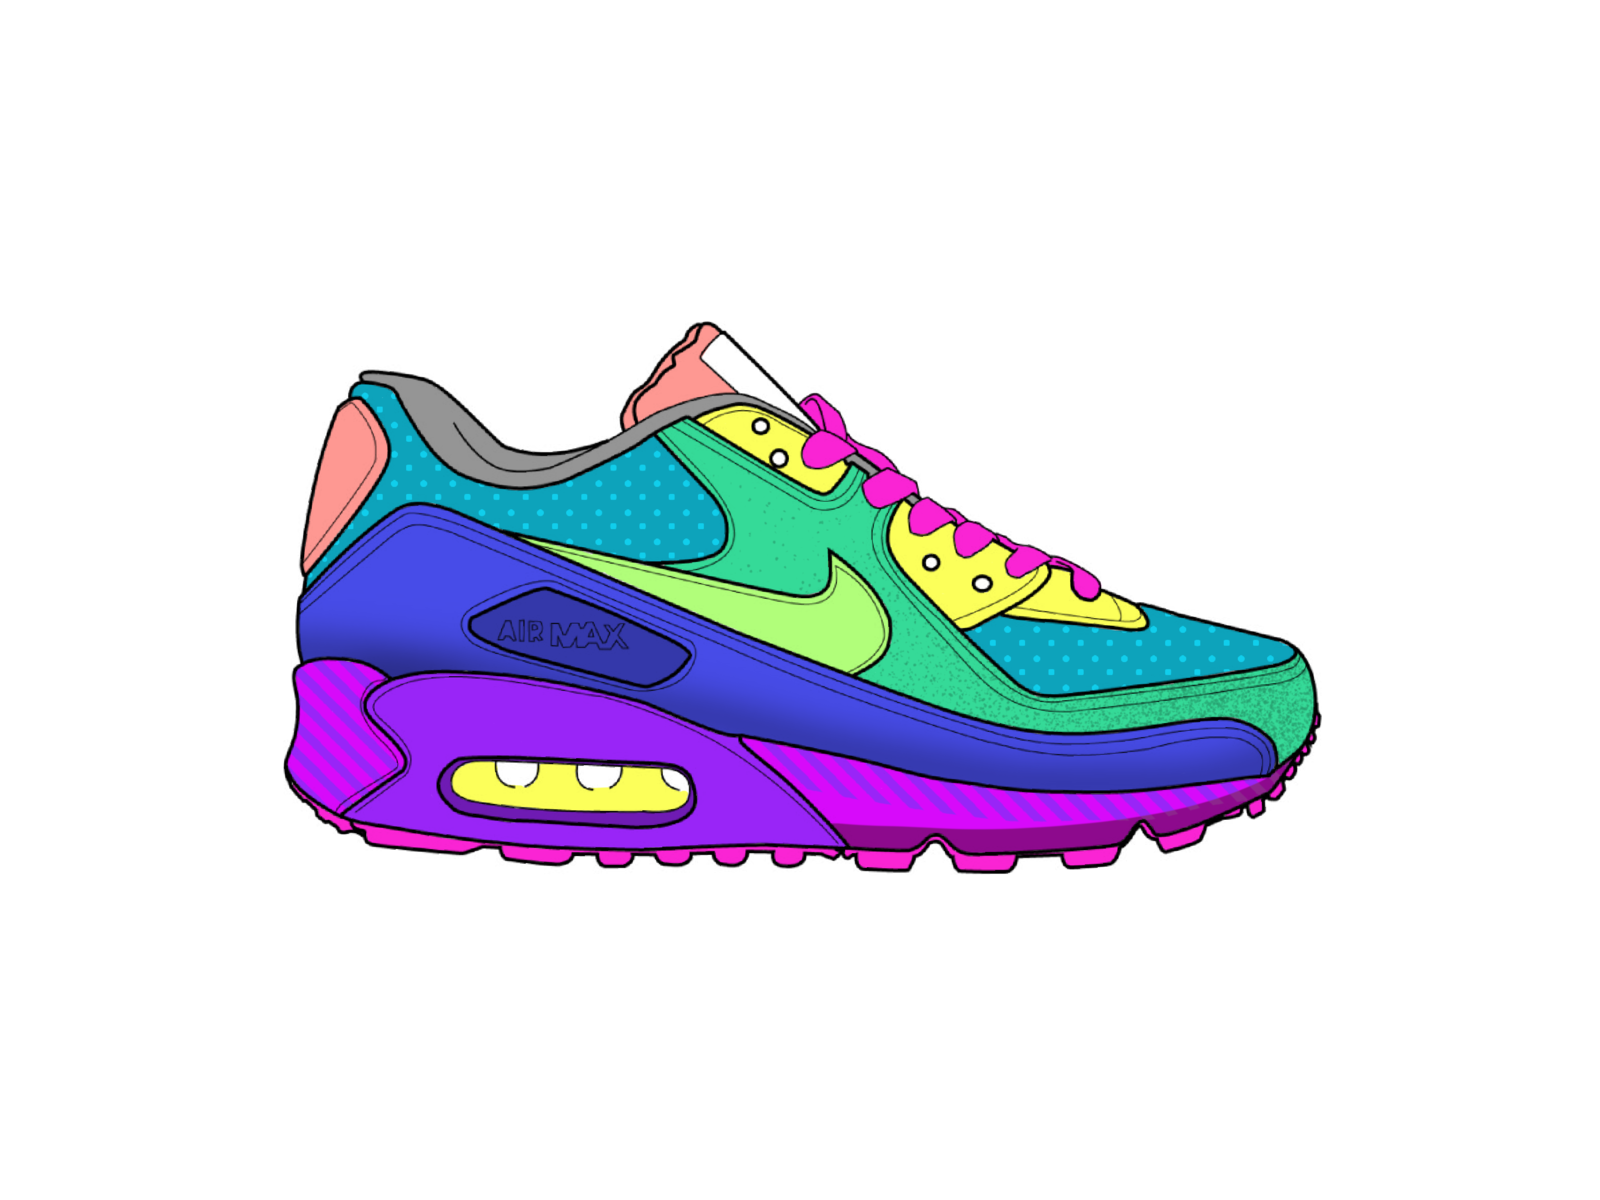 Nike Air Max - Skate by Jake Mize on Dribbble